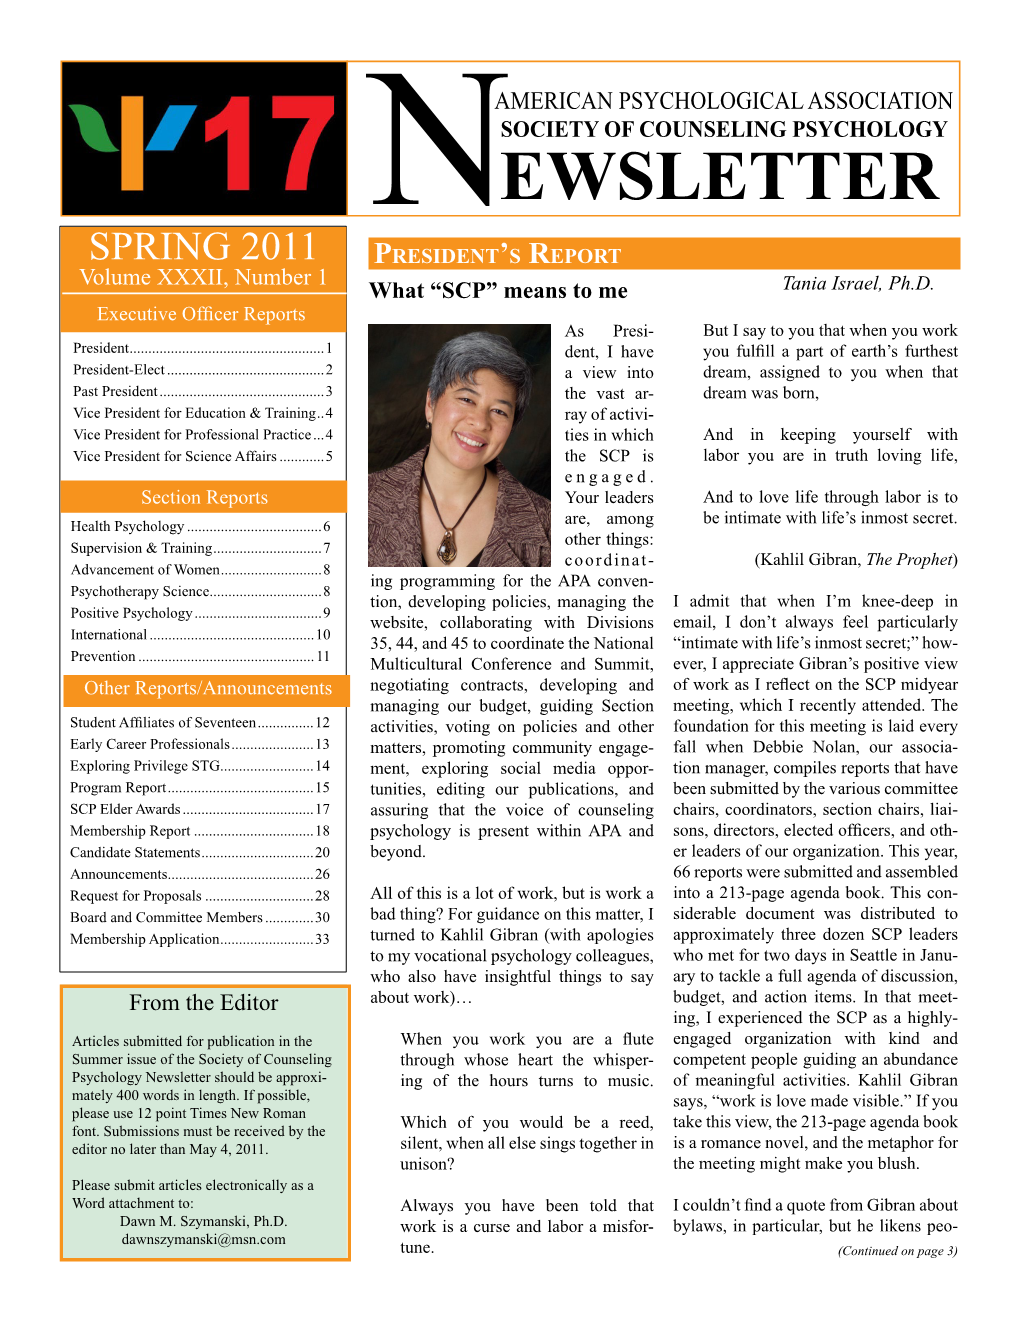 NEWSLETTER SPRING 2011 President’S Report Volume XXXII, Number 1 What “SCP” Means to Me Tania Israel, Ph.D